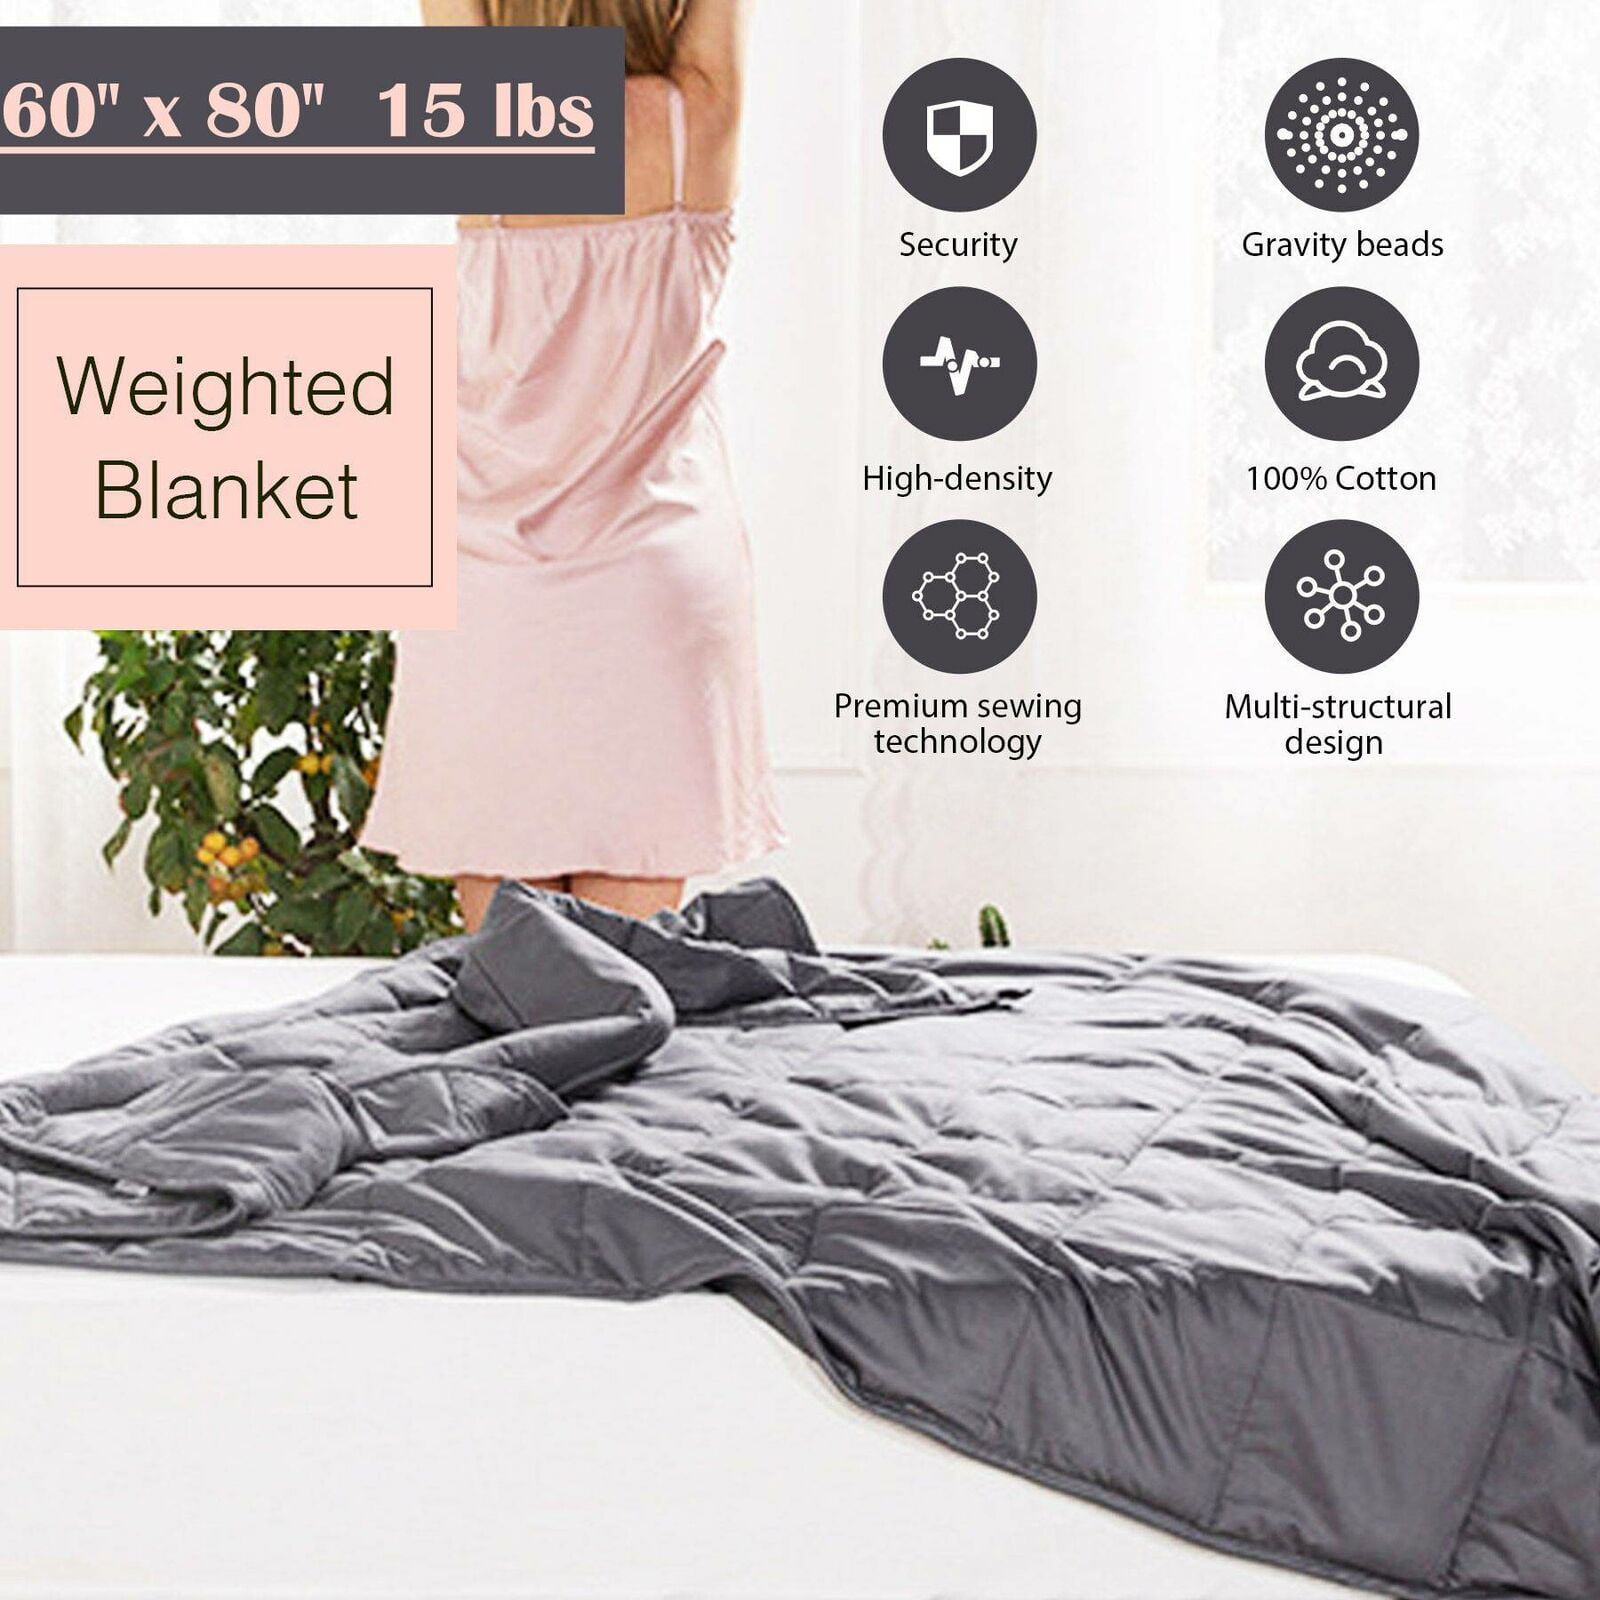 60x80" Weighted Blanket Full Queen Size Reduce Stress 15lb - Walmart